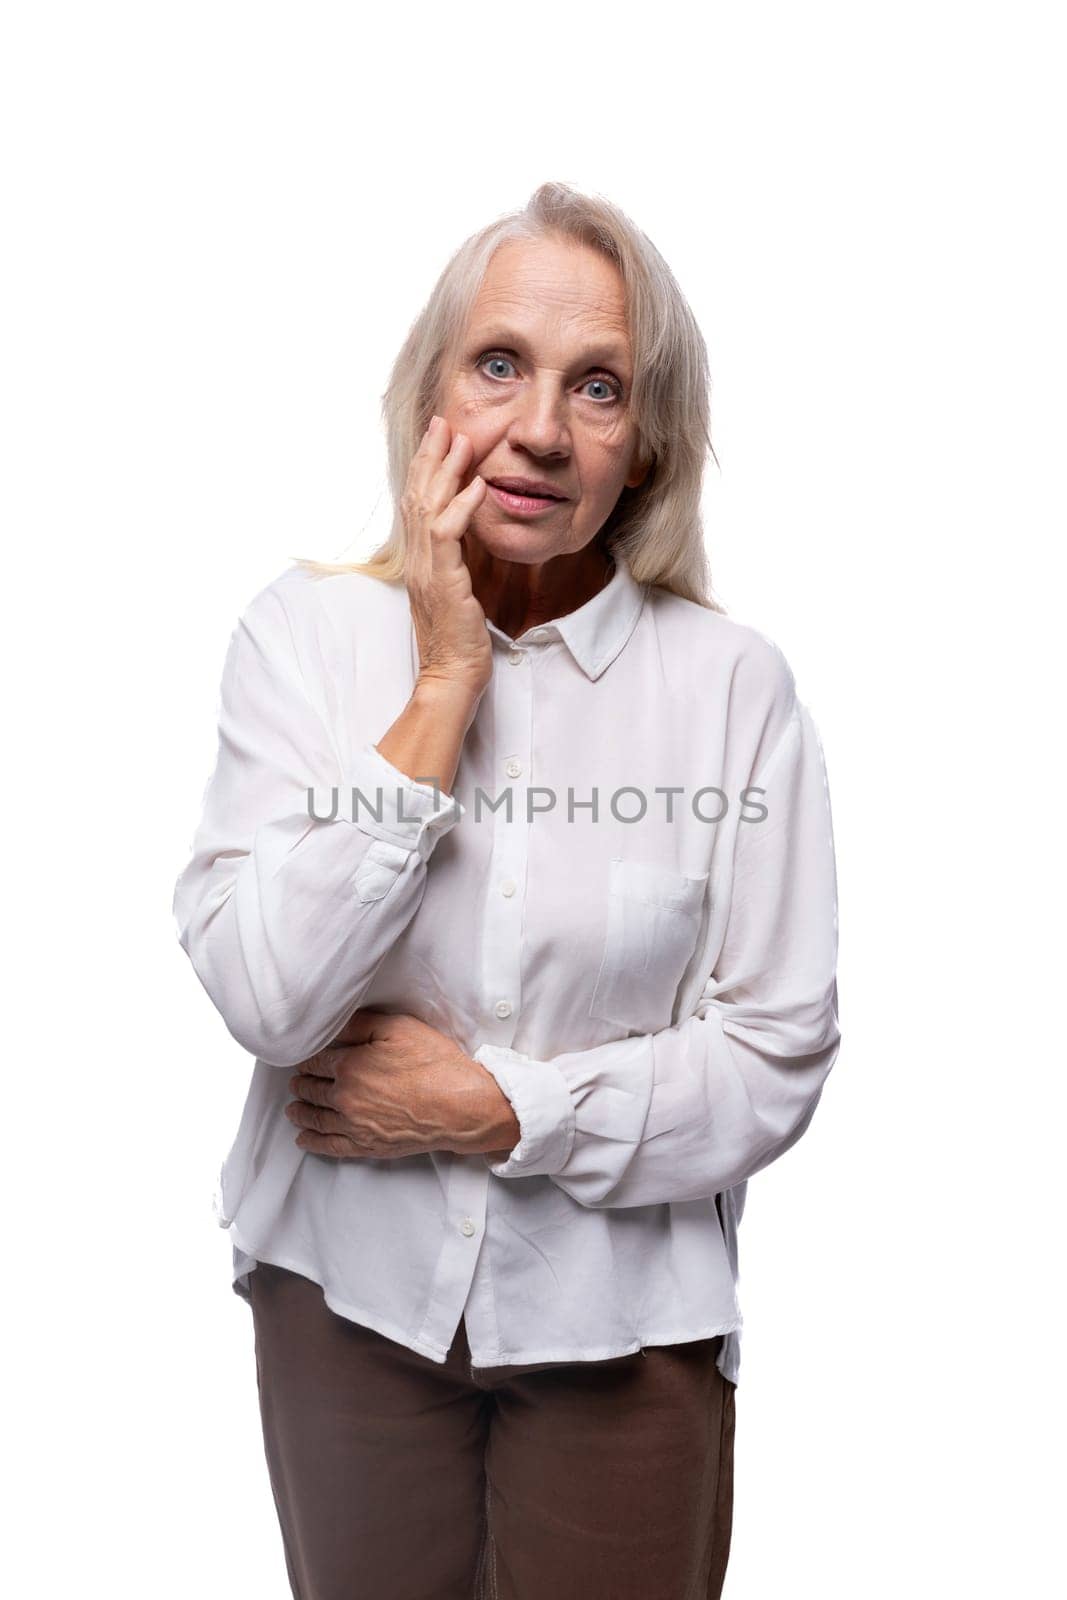 Pensioner woman with gray hair feels suspicious looking at camera.